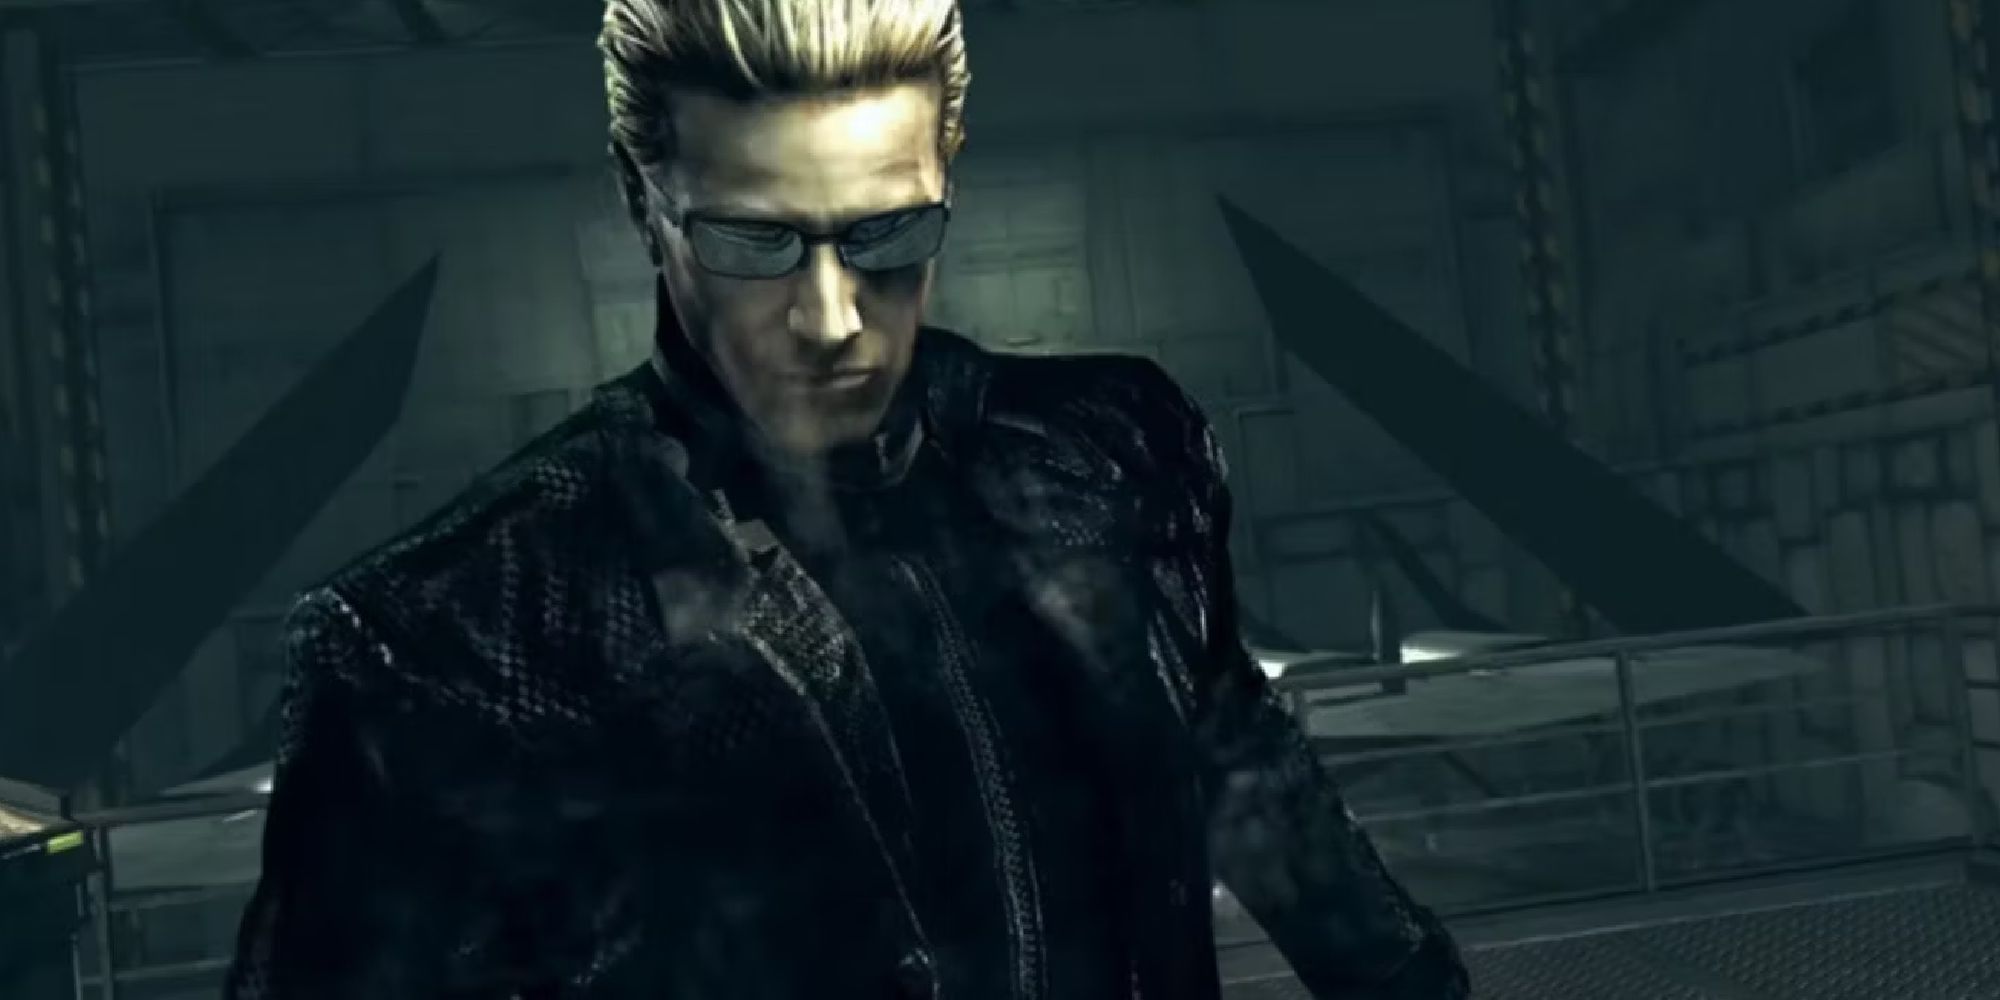 Wesker in the fifth installment, with his trademark shades and leather trenchcoat.